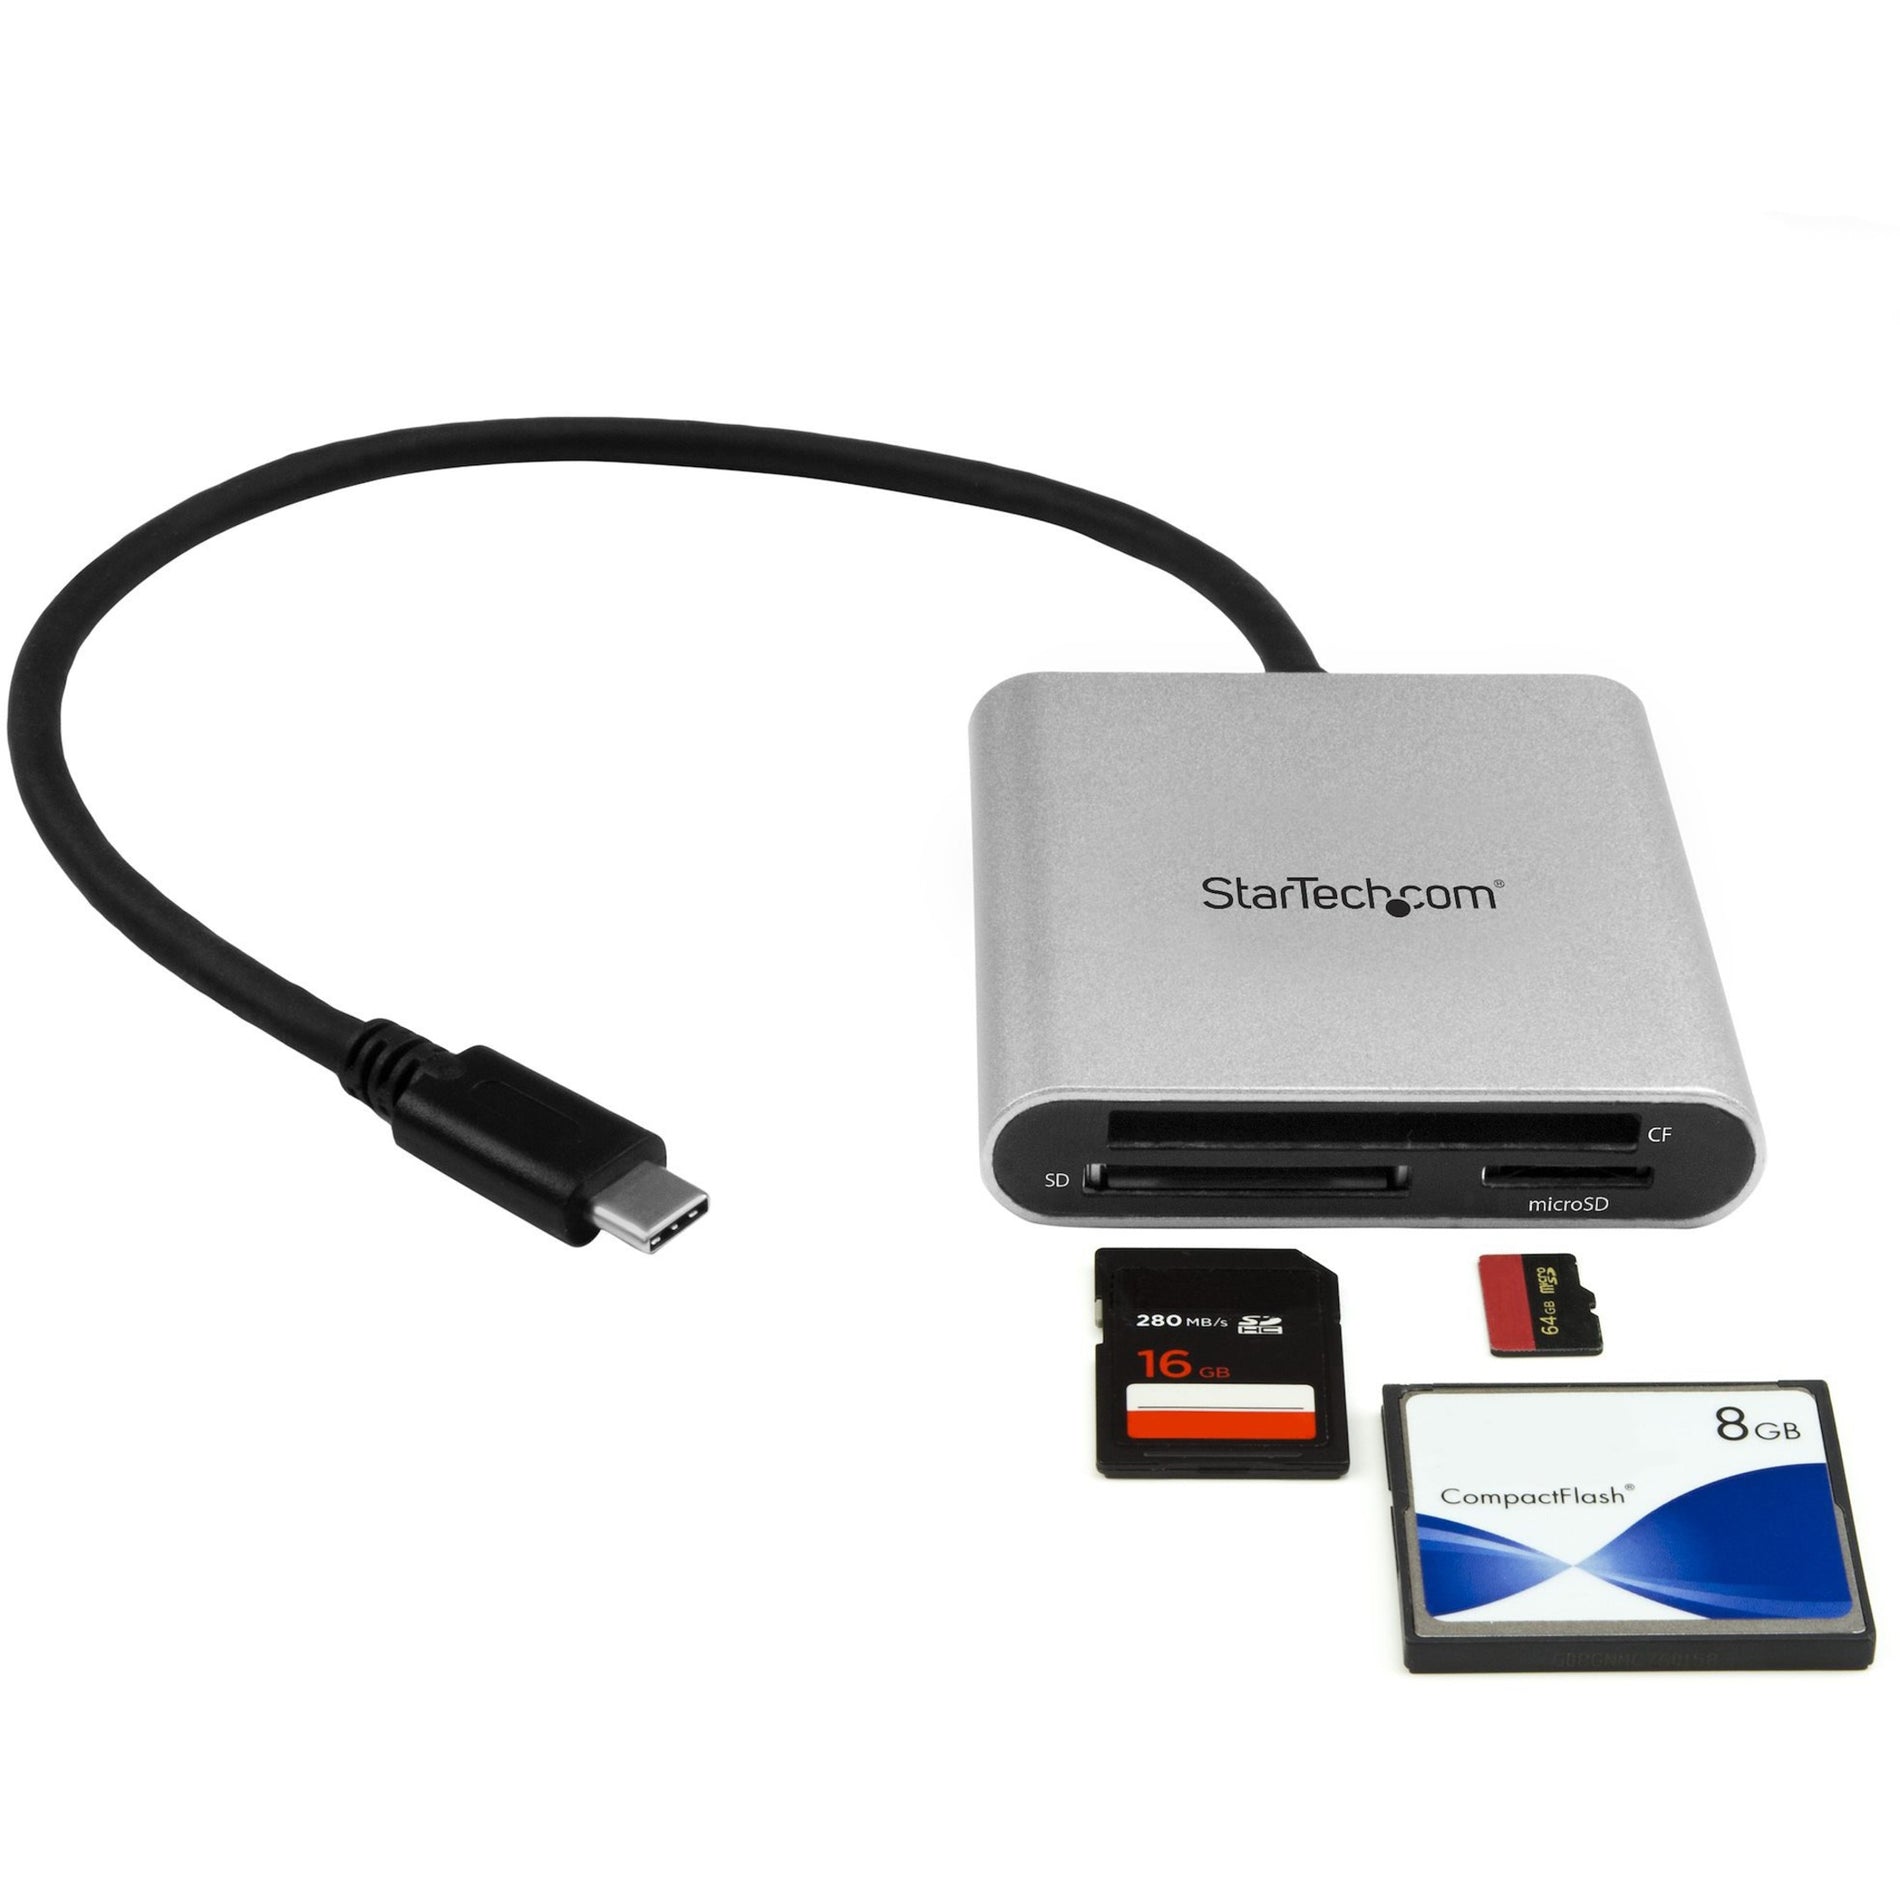 StarTech.com FCREADU3C Flash Reader, USB 3.0 Multi-Card Reader / Writer with USB-C - SD microSD and CompactFlash Card Reader w/ Integrated USB-C Cable